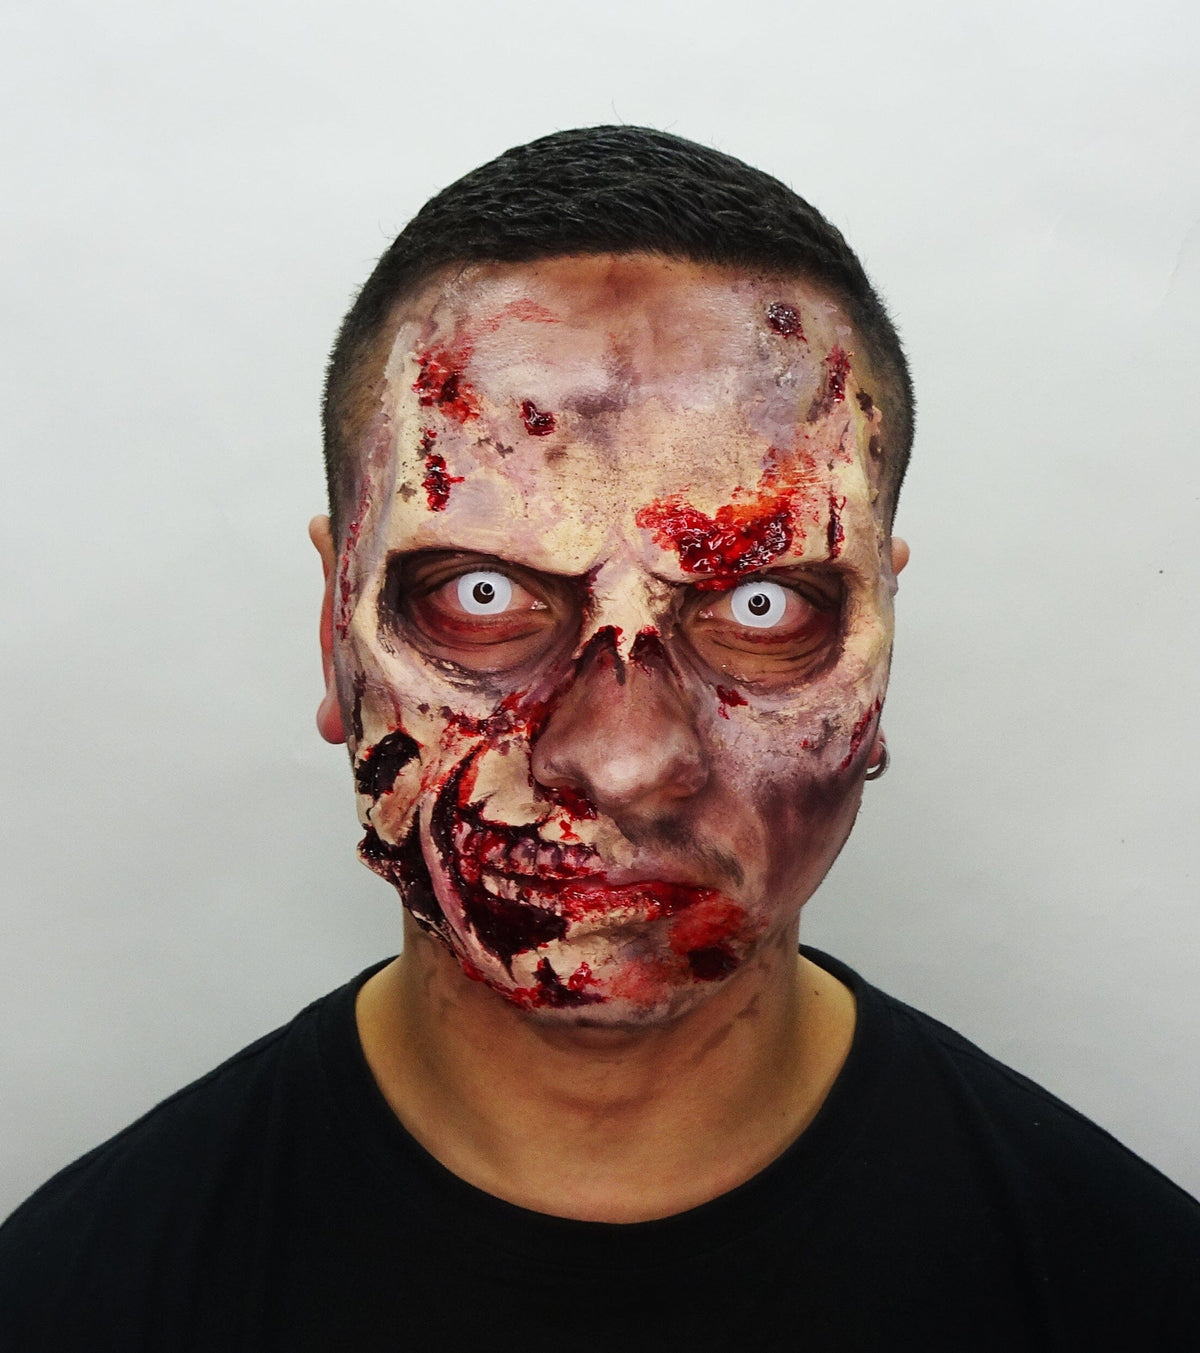 Paint Your Date- Halloween Edition- Zombify Your Love!!!